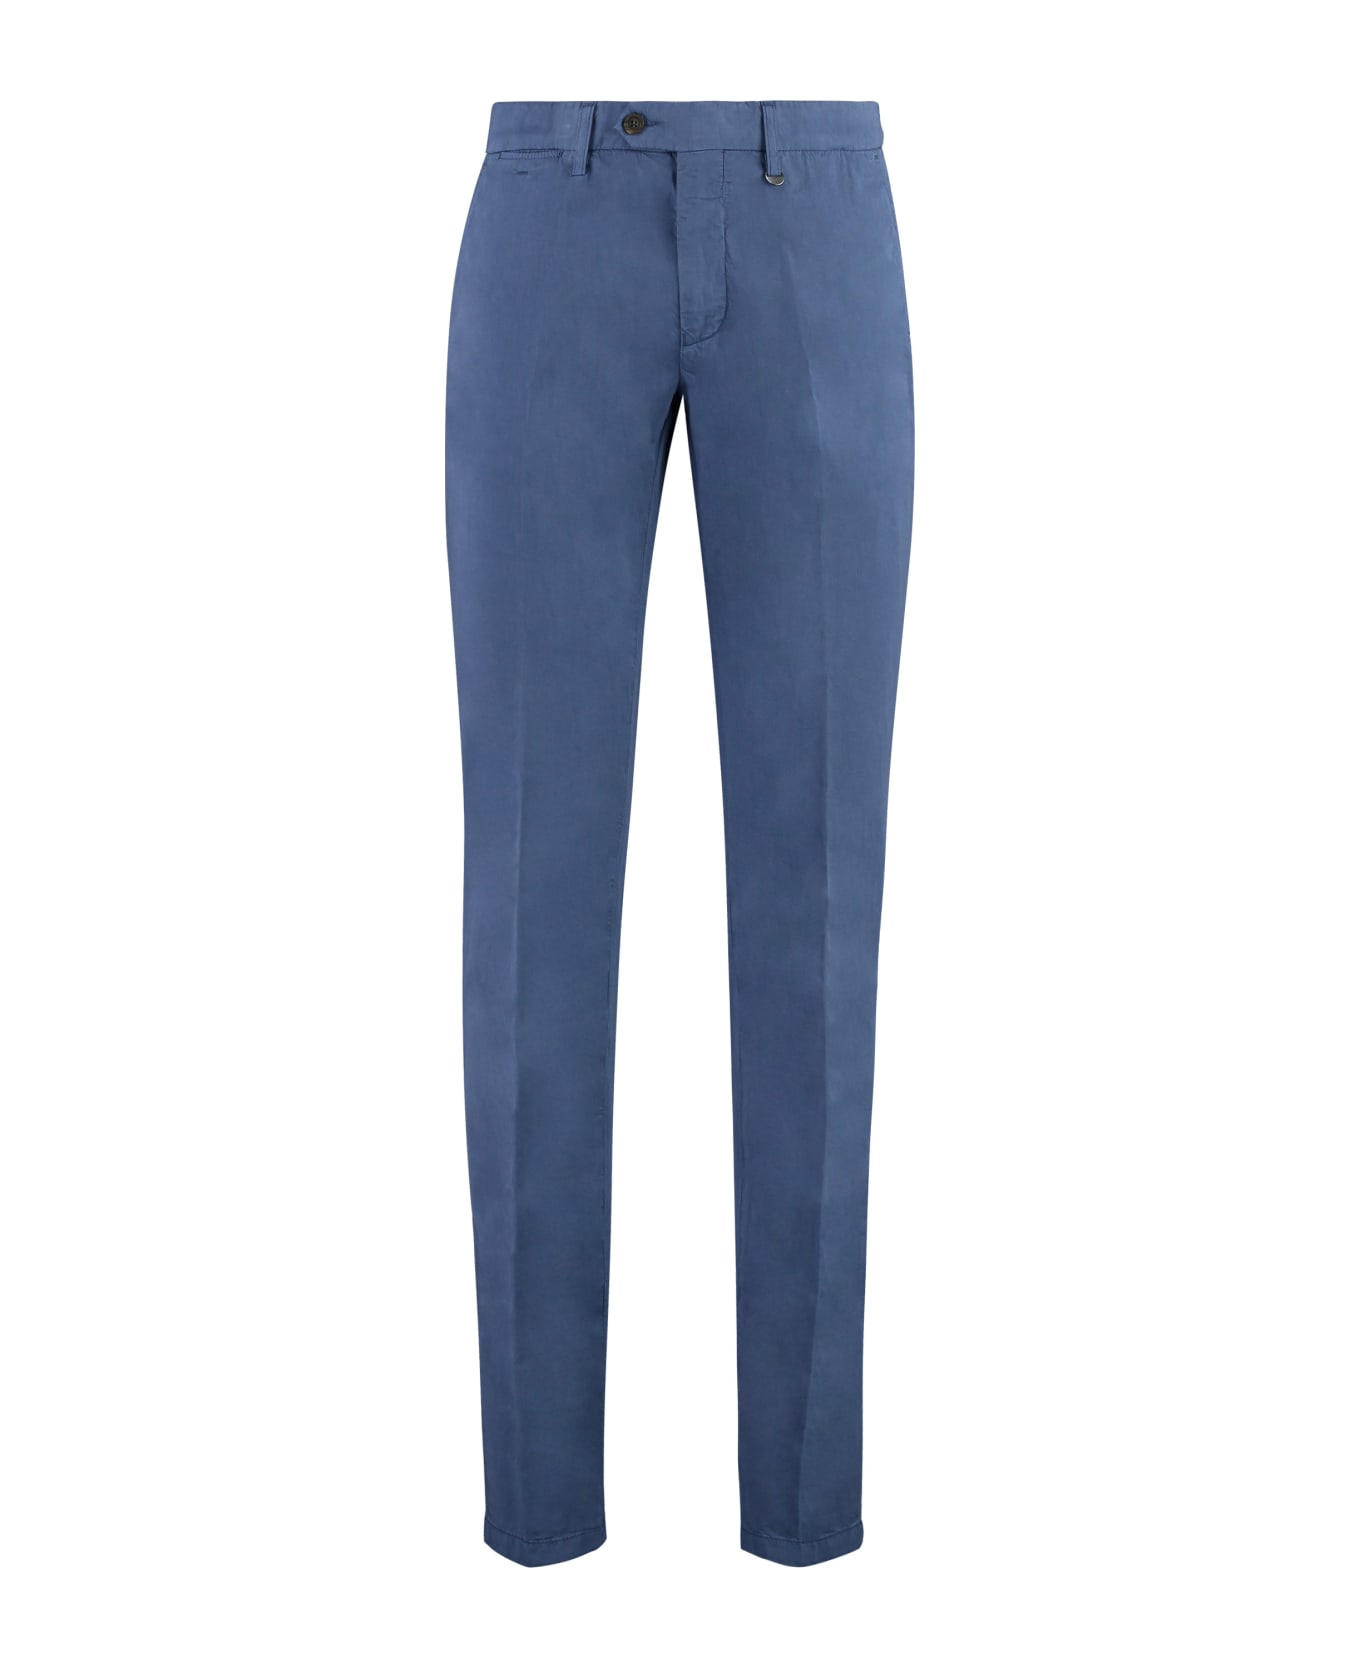 Canali Cotton Blend Trousers - blue ボトムス